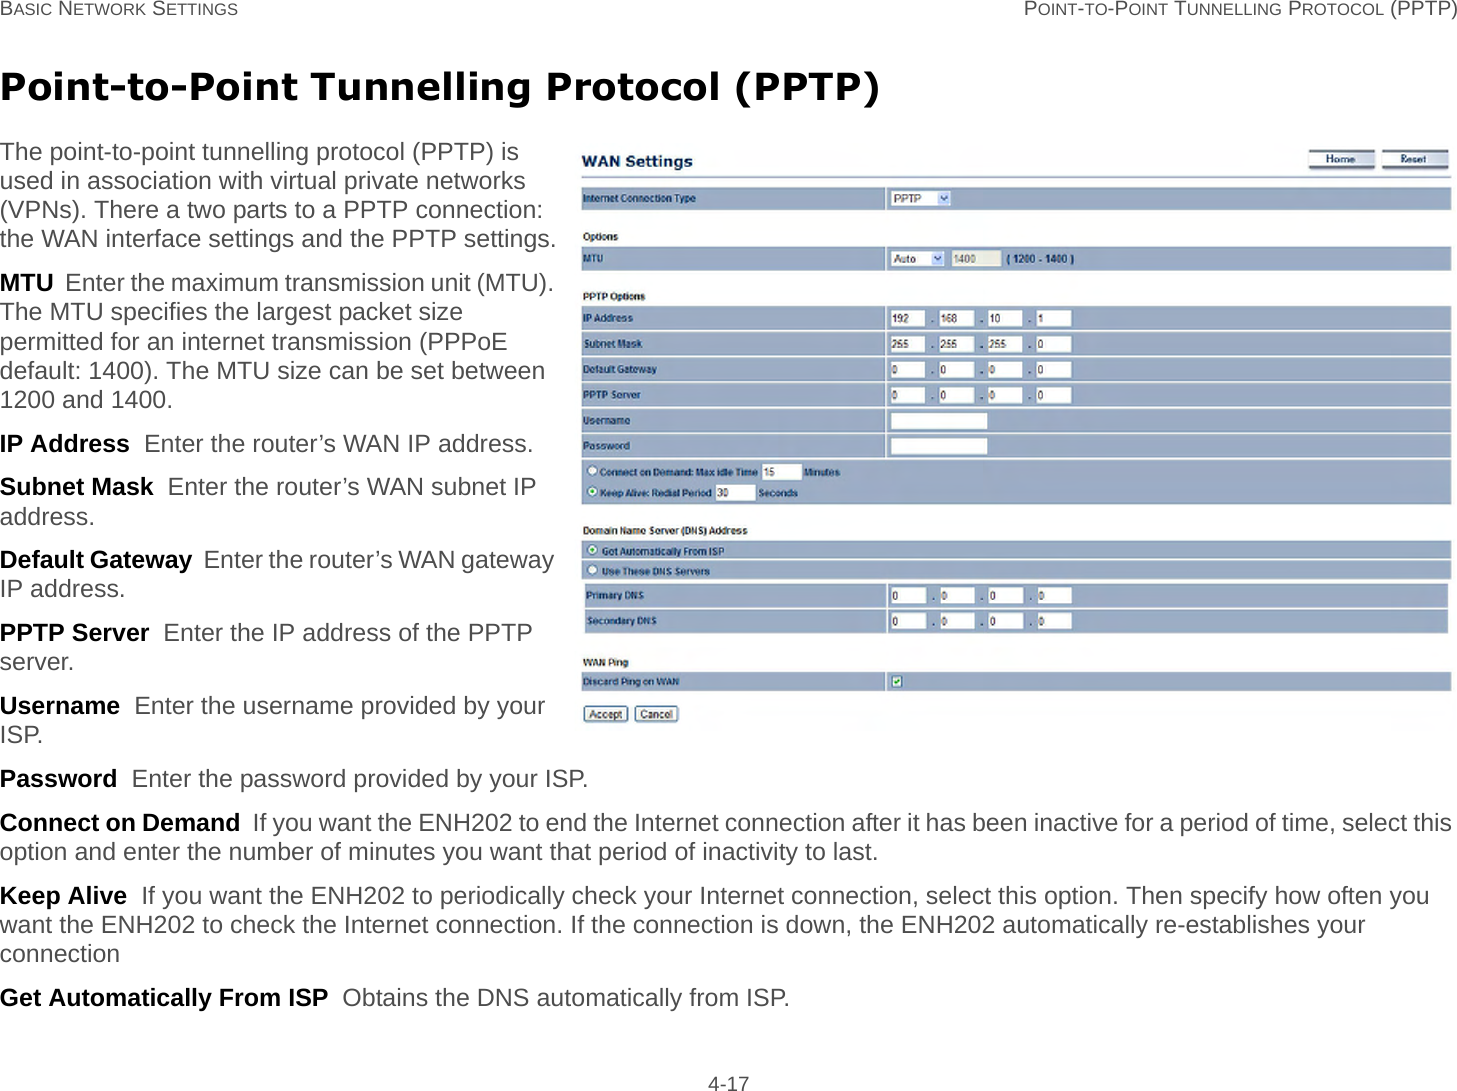 BASIC NETWORK SETTINGS POINT-TO-POINT TUNNELLING PROTOCOL (PPTP) 4-17Point-to-Point Tunnelling Protocol (PPTP)The point-to-point tunnelling protocol (PPTP) is used in association with virtual private networks (VPNs). There a two parts to a PPTP connection: the WAN interface settings and the PPTP settings.MTU  Enter the maximum transmission unit (MTU). The MTU specifies the largest packet size permitted for an internet transmission (PPPoE default: 1400). The MTU size can be set between 1200 and 1400.IP Address  Enter the router’s WAN IP address.Subnet Mask  Enter the router’s WAN subnet IP address.Default Gateway  Enter the router’s WAN gateway IP address.PPTP Server  Enter the IP address of the PPTP server.Username  Enter the username provided by your ISP.Password  Enter the password provided by your ISP.Connect on Demand  If you want the ENH202 to end the Internet connection after it has been inactive for a period of time, select this option and enter the number of minutes you want that period of inactivity to last.Keep Alive  If you want the ENH202 to periodically check your Internet connection, select this option. Then specify how often you want the ENH202 to check the Internet connection. If the connection is down, the ENH202 automatically re-establishes your connectionGet Automatically From ISP  Obtains the DNS automatically from ISP.